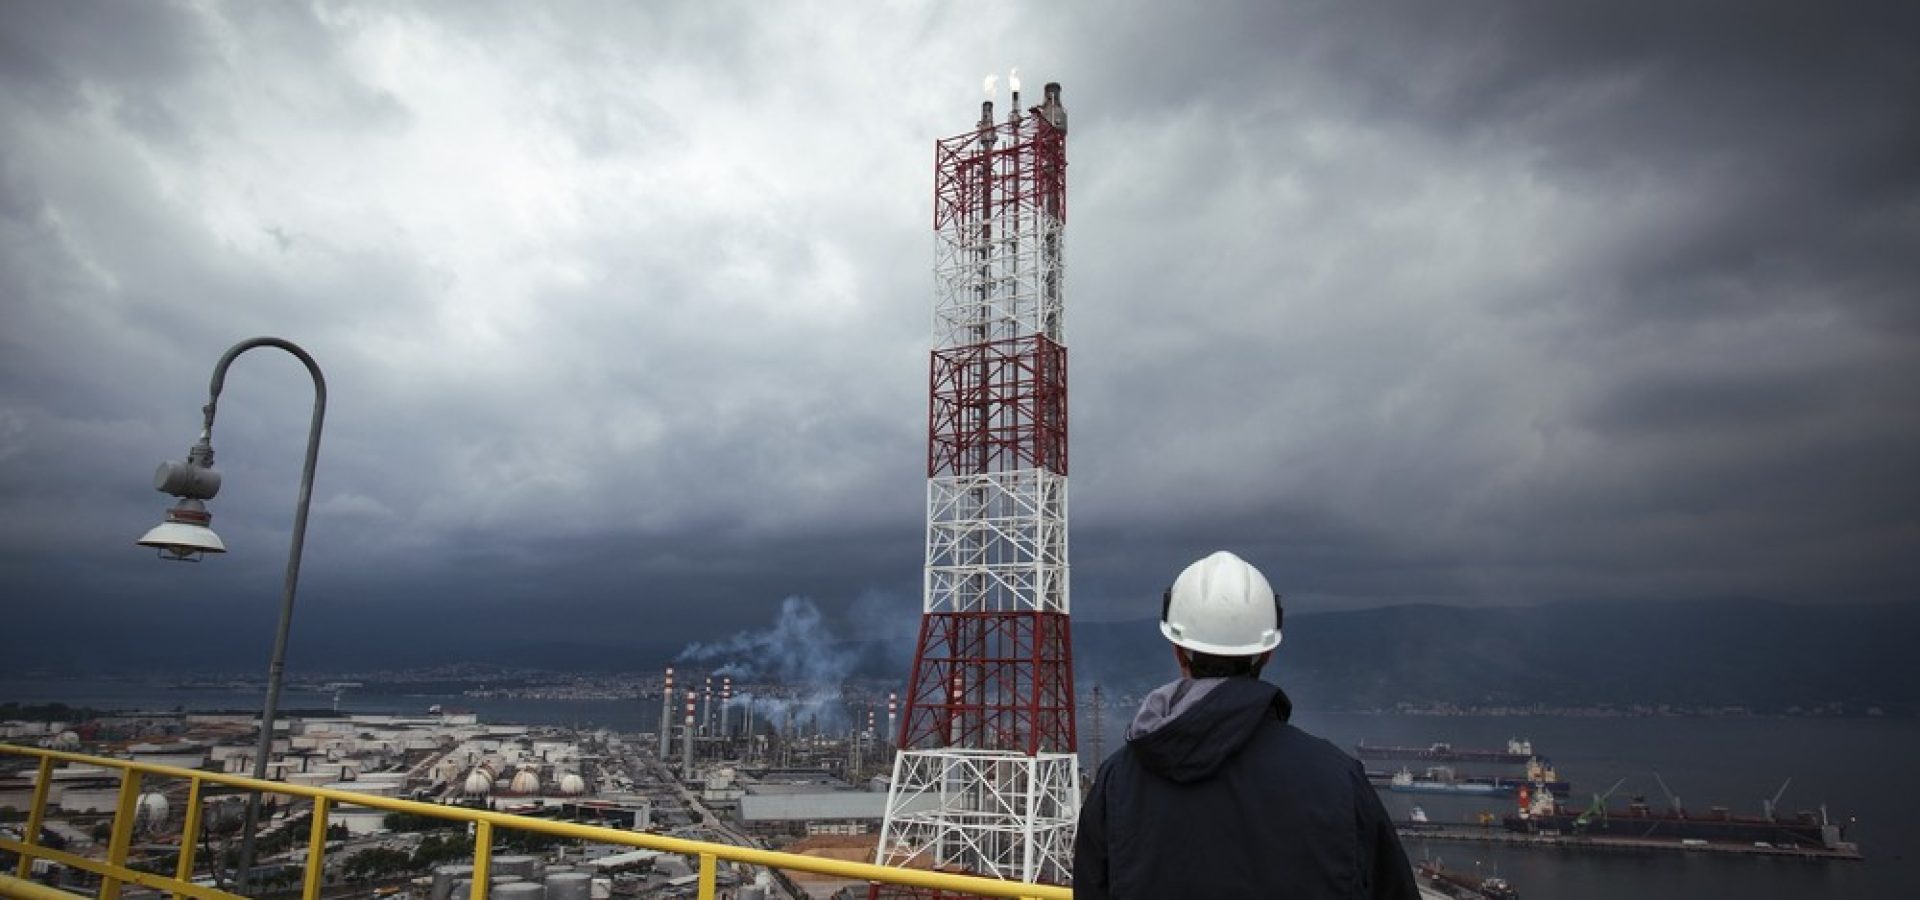 Wibest – Climate Week: A man staring at an oil refinery under a stormy sky.